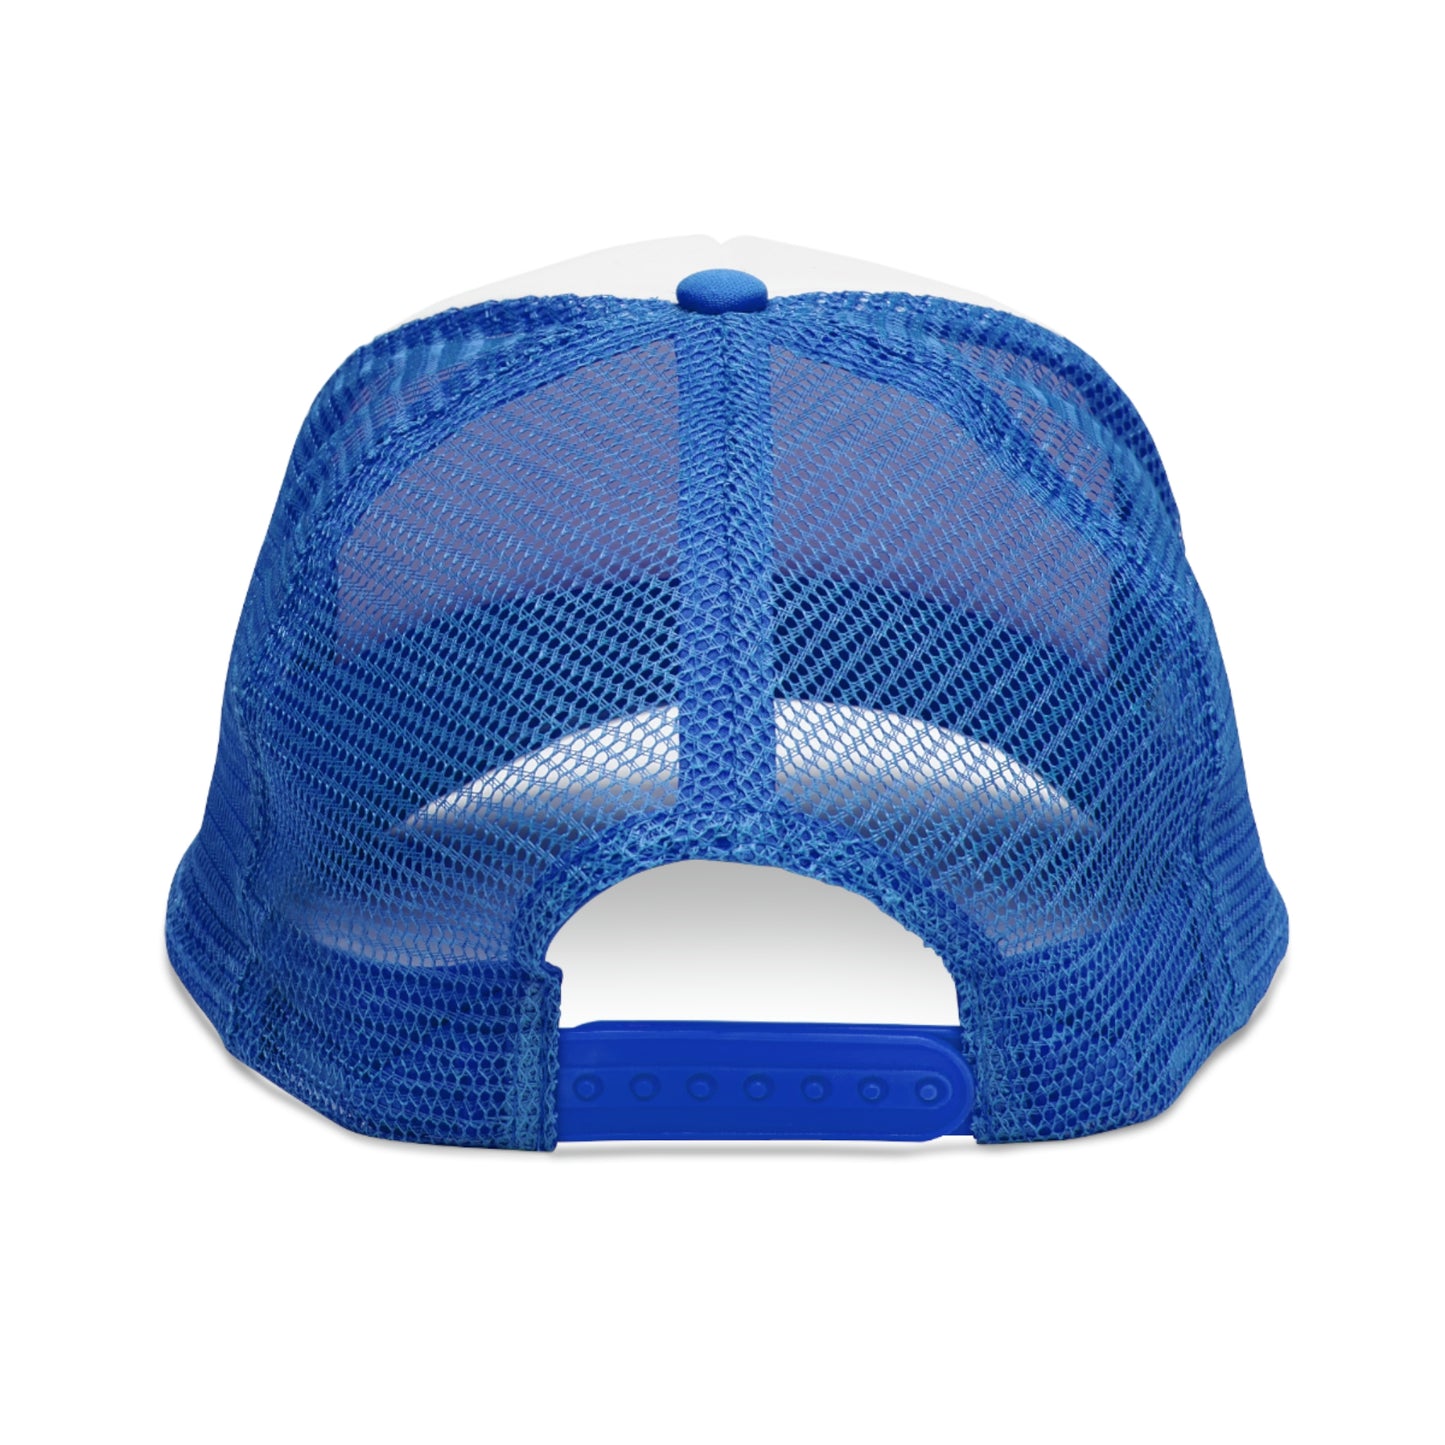 Travel The Only Thing You Buy That Makes You Richer...–Mesh Cap